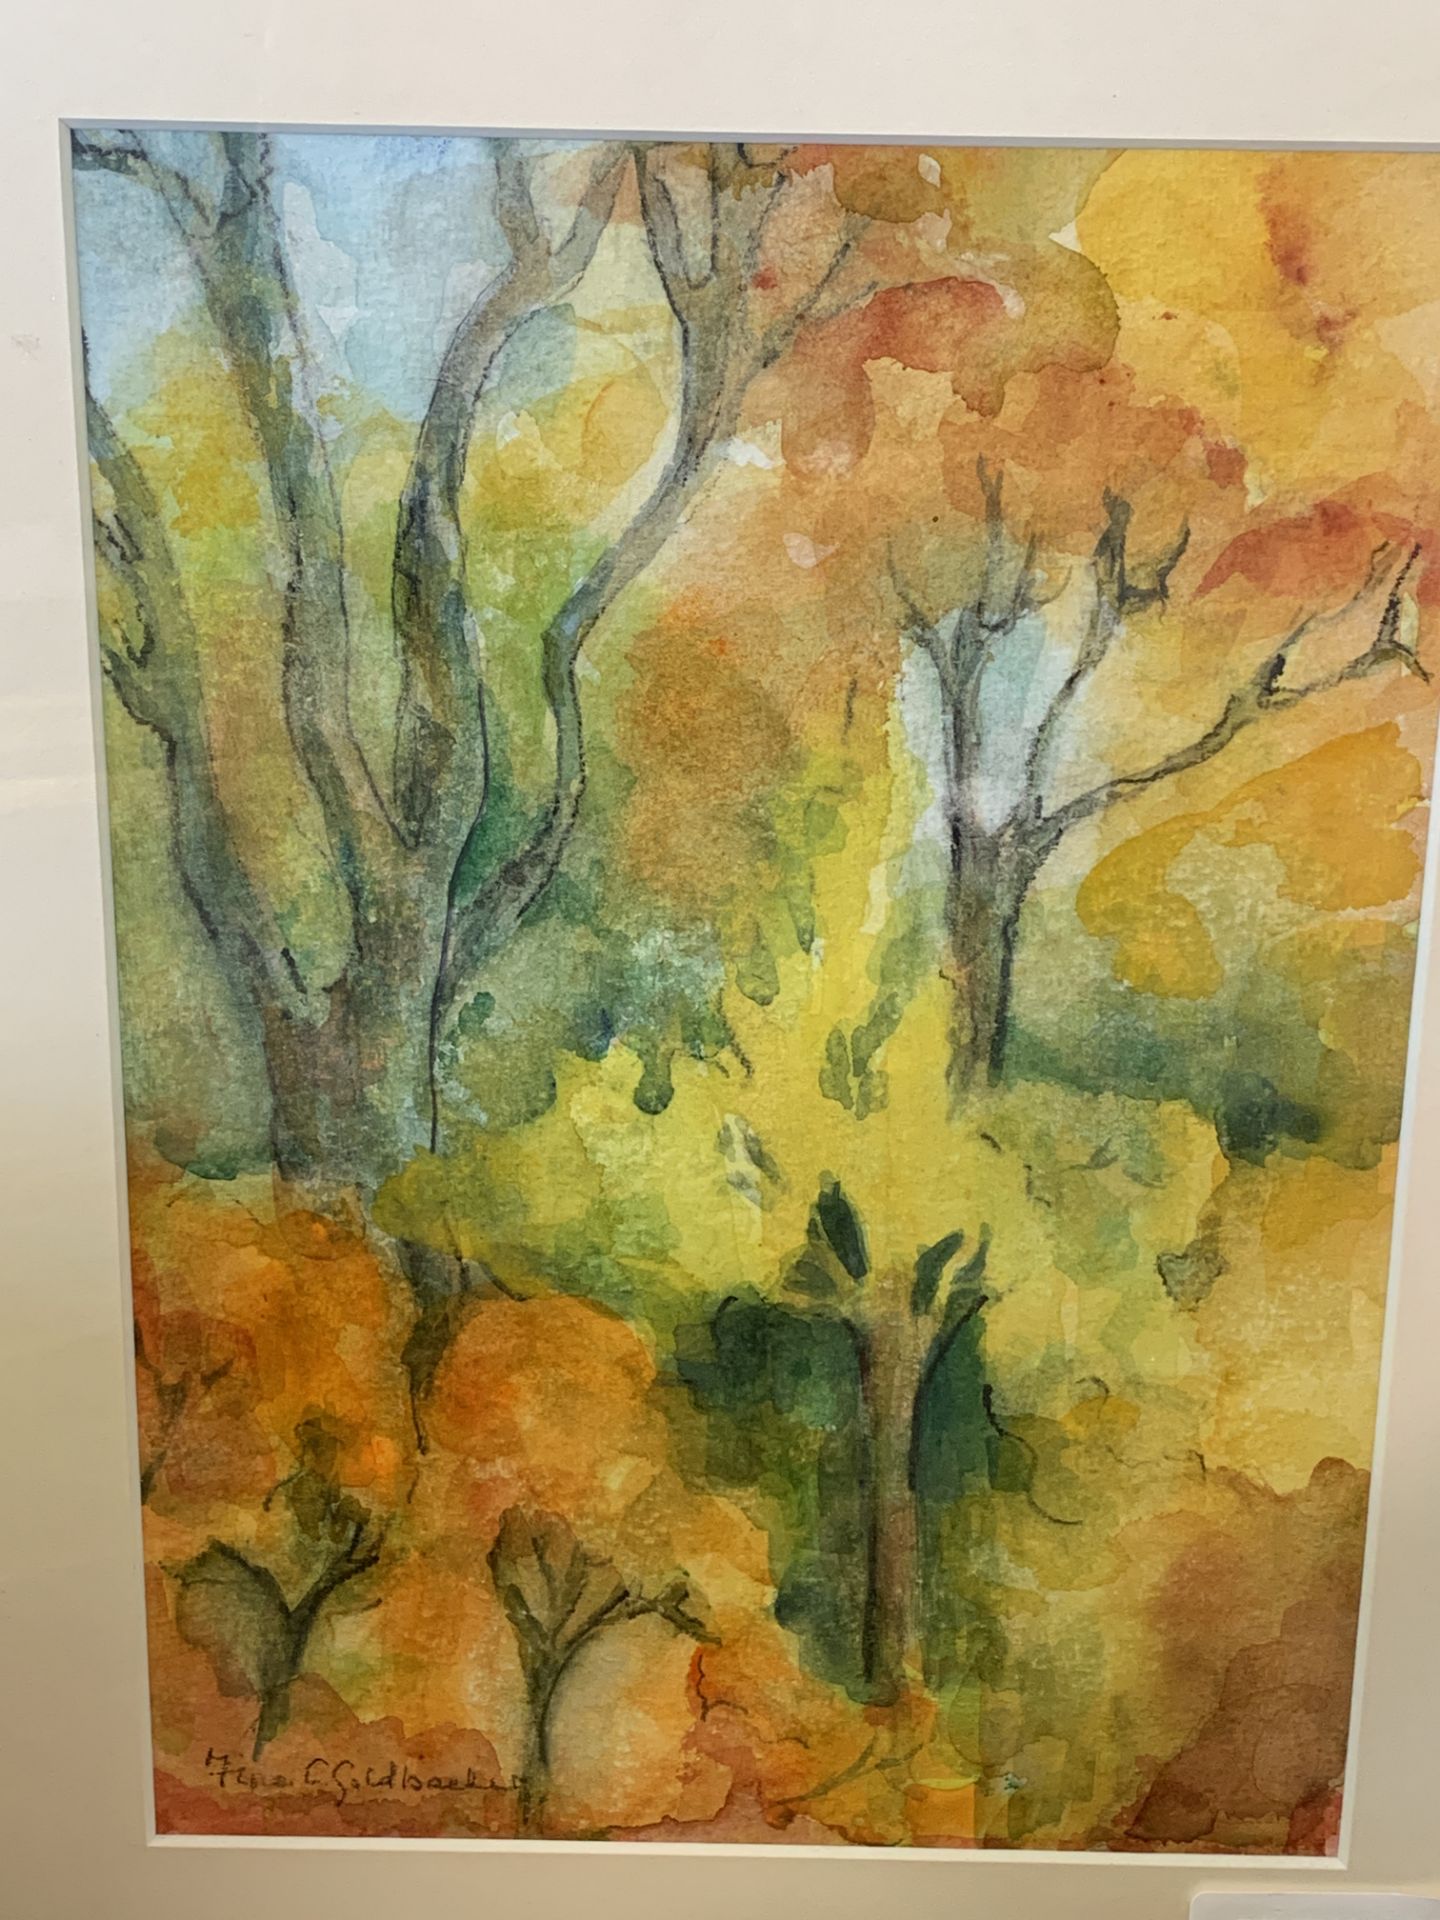 Two framed and glazed watercolours of autumn woodland scenes by Fiona Goldbacher - Image 2 of 2